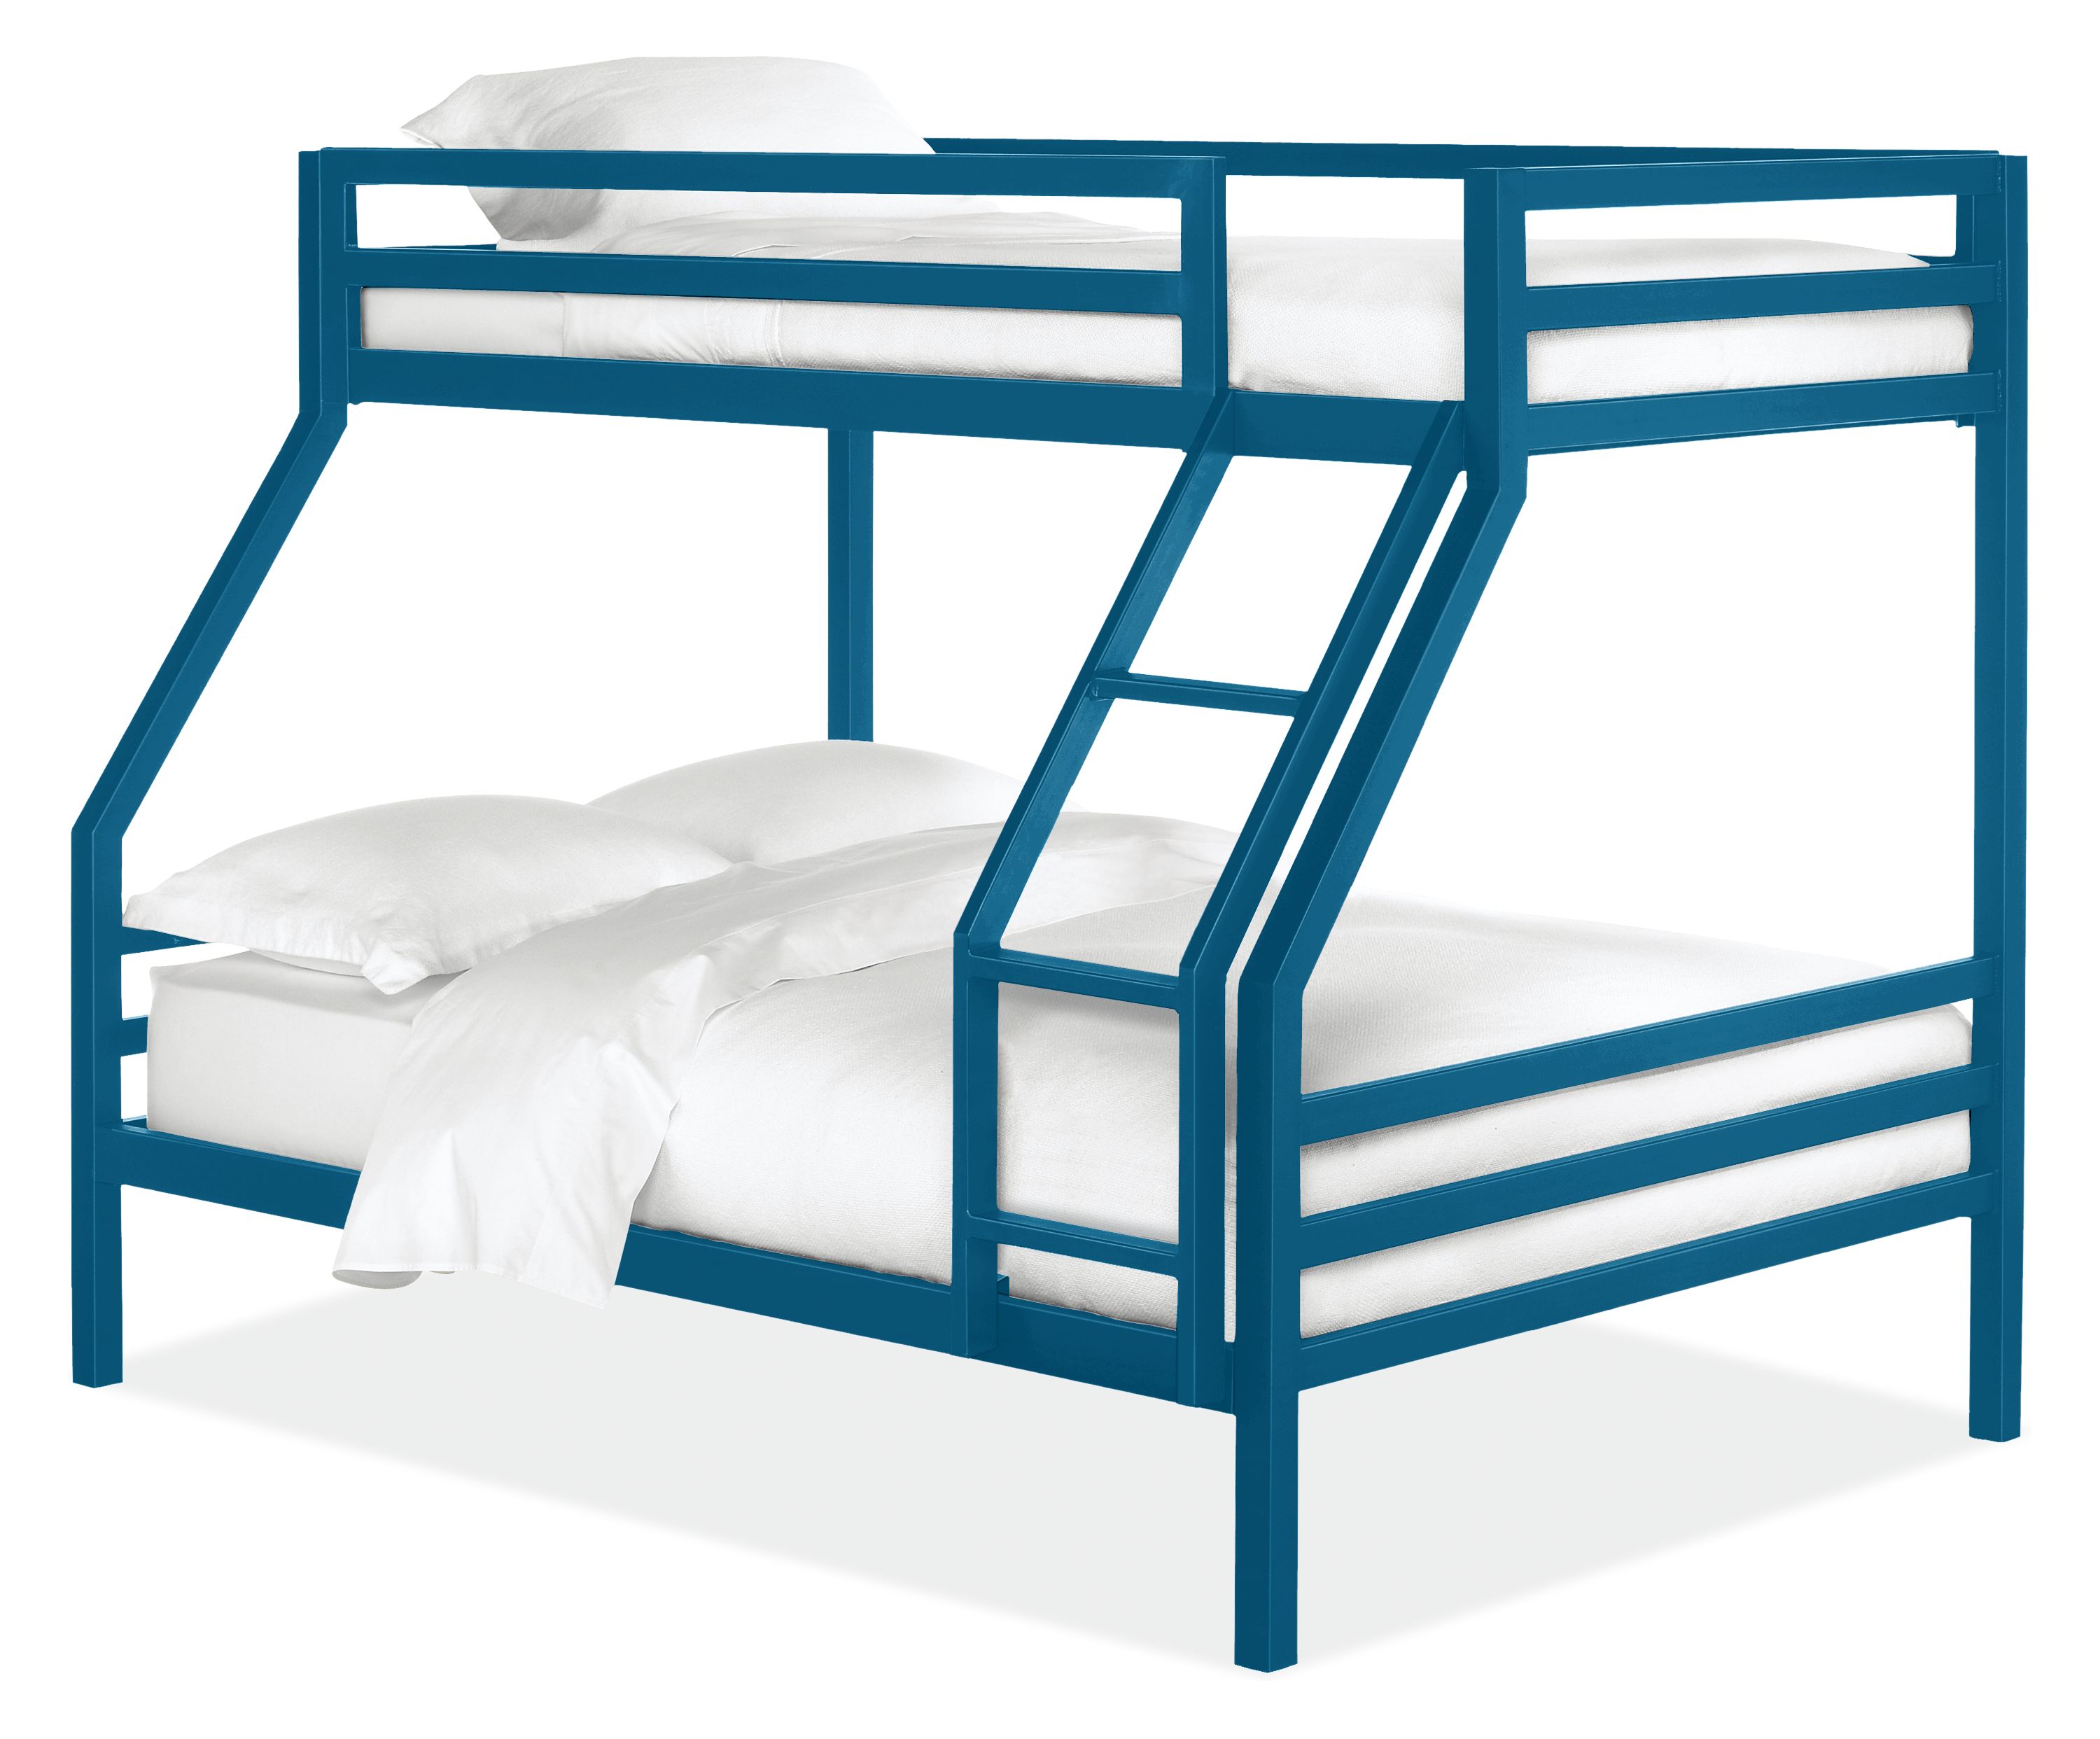 Fort Bunk Beds In Colors Twin Over, Double Full Size Bunk Beds